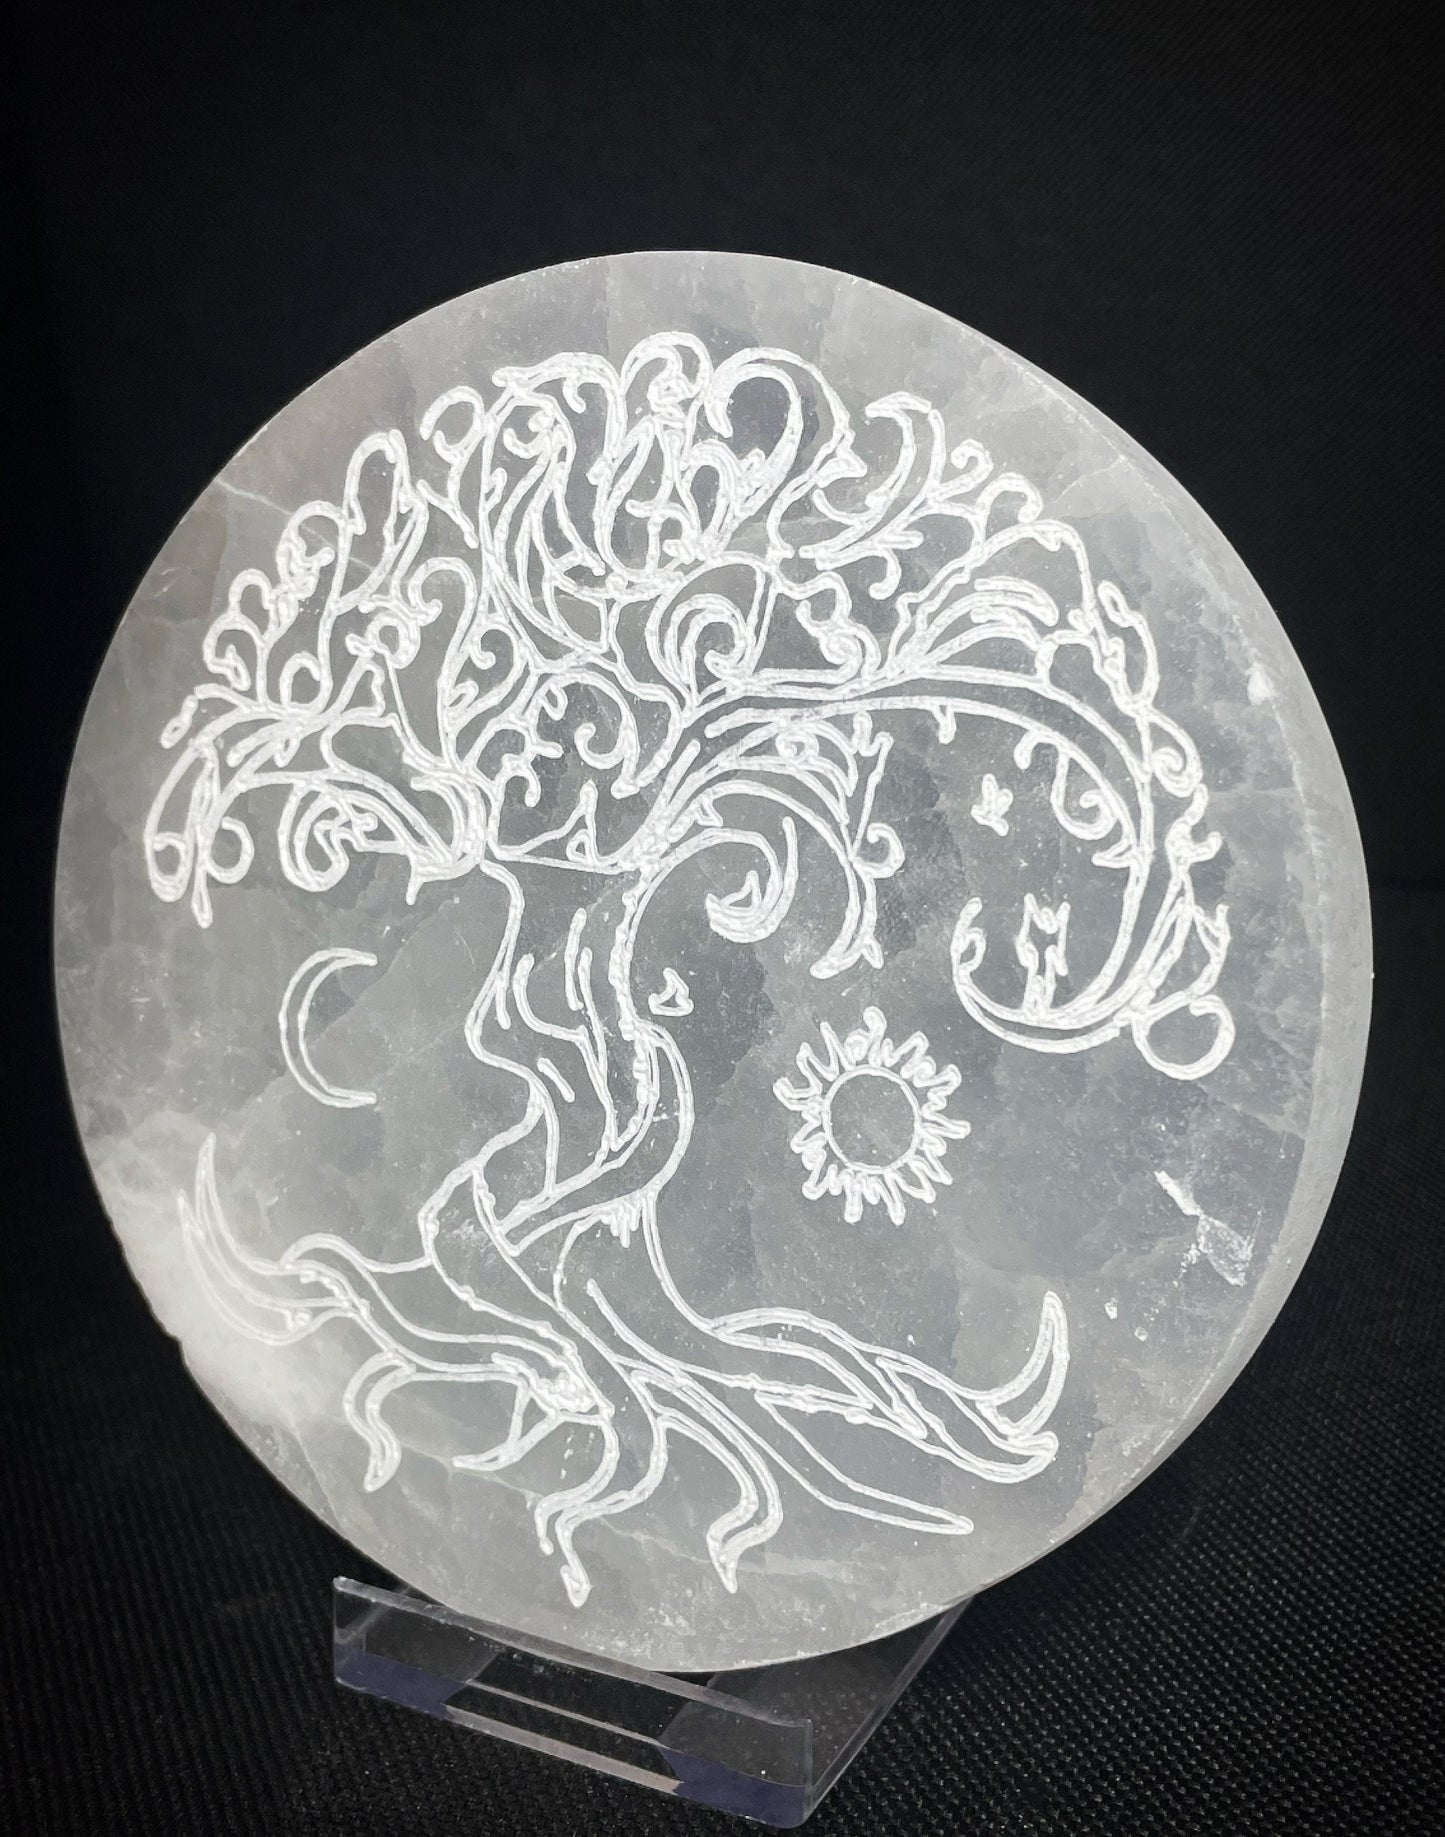 Gorgeous Selenite Circle Tree of Life Crystal Charging Plate disc From Morocco